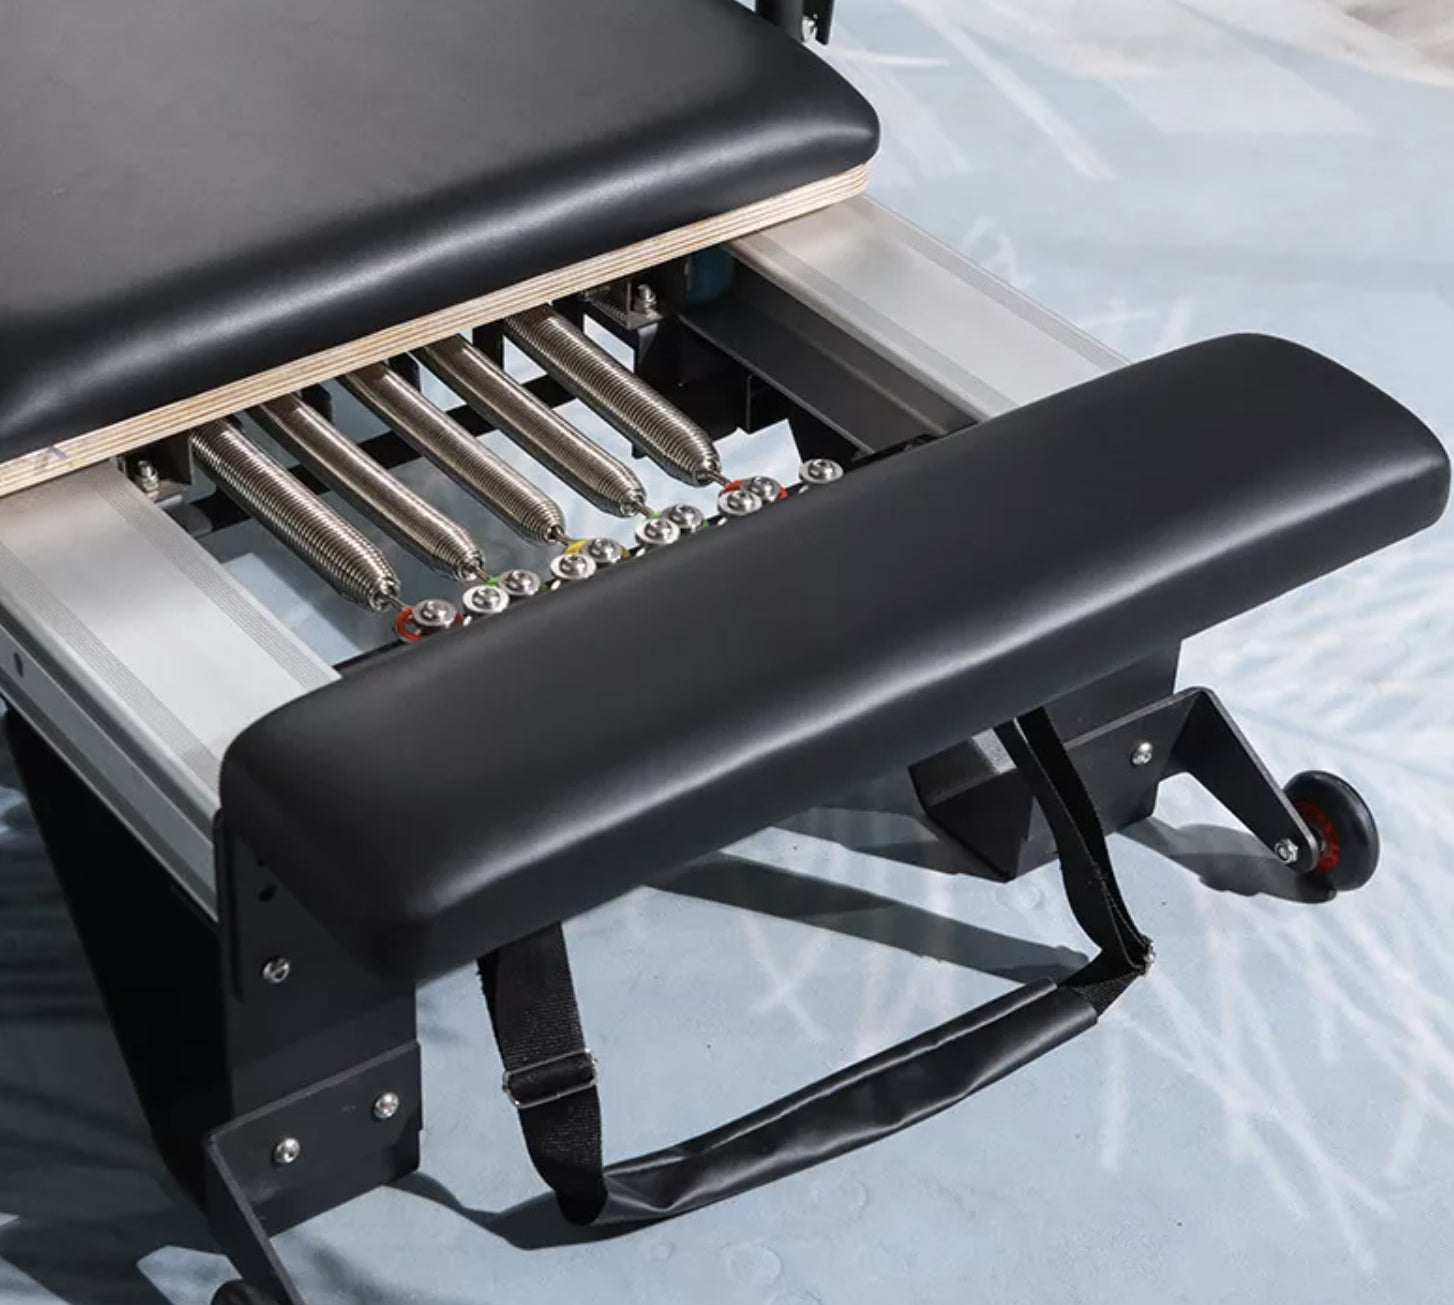 Aluminum Adjustable Pilates Reformer with Sitting Box and Board - Personal Hour for Yoga and Meditations 